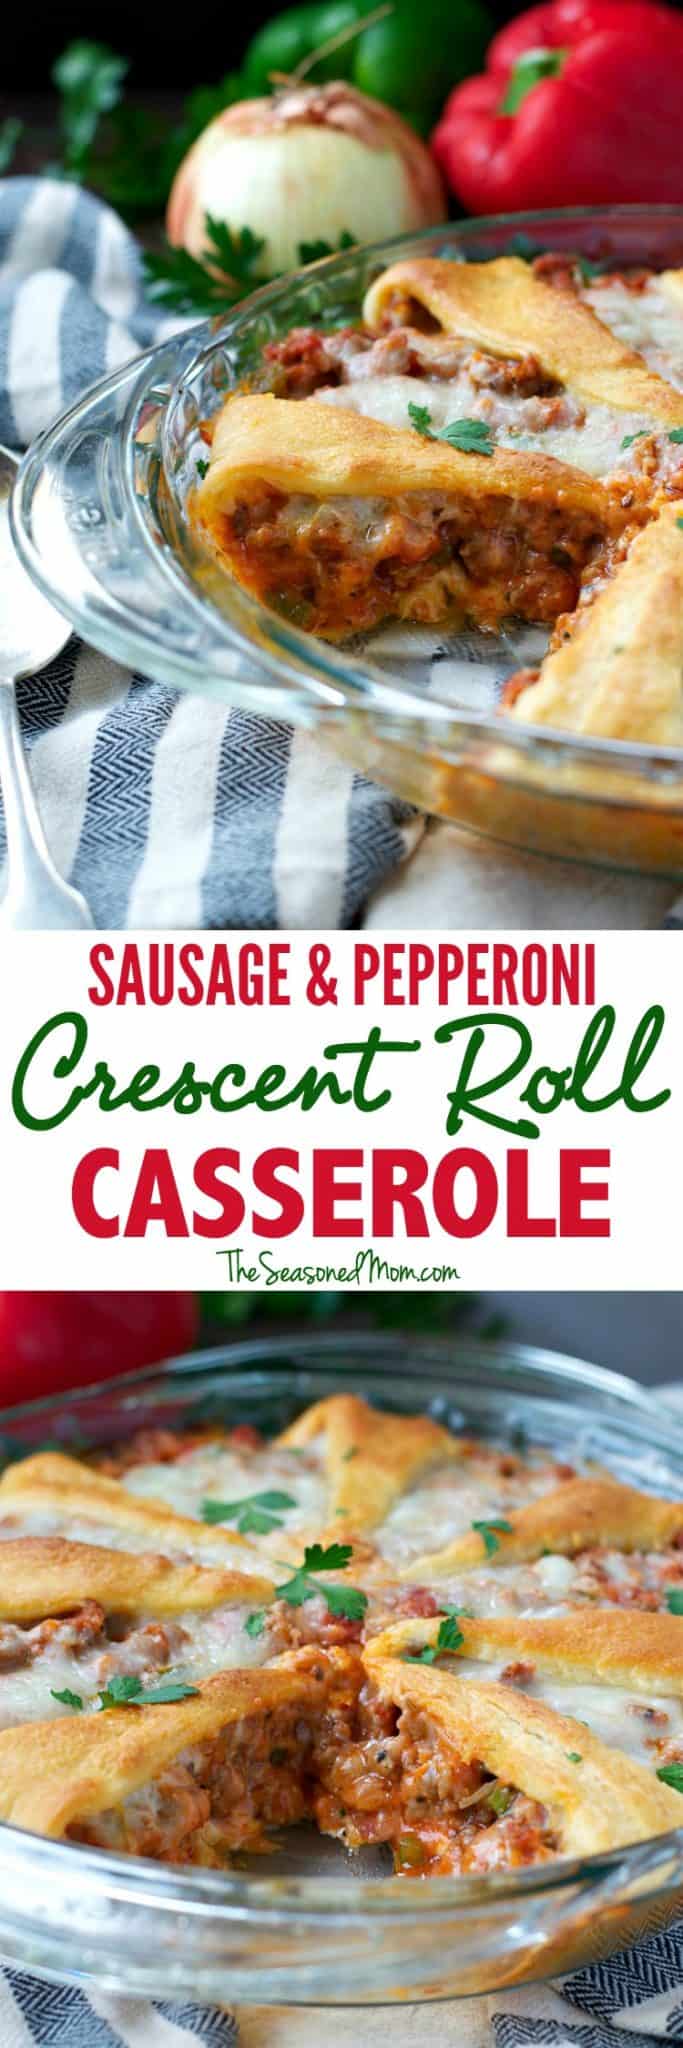 Ready for an easy weeknight meal? This Sausage & Pepperoni Crescent Roll Casserole is sure to be a hit.